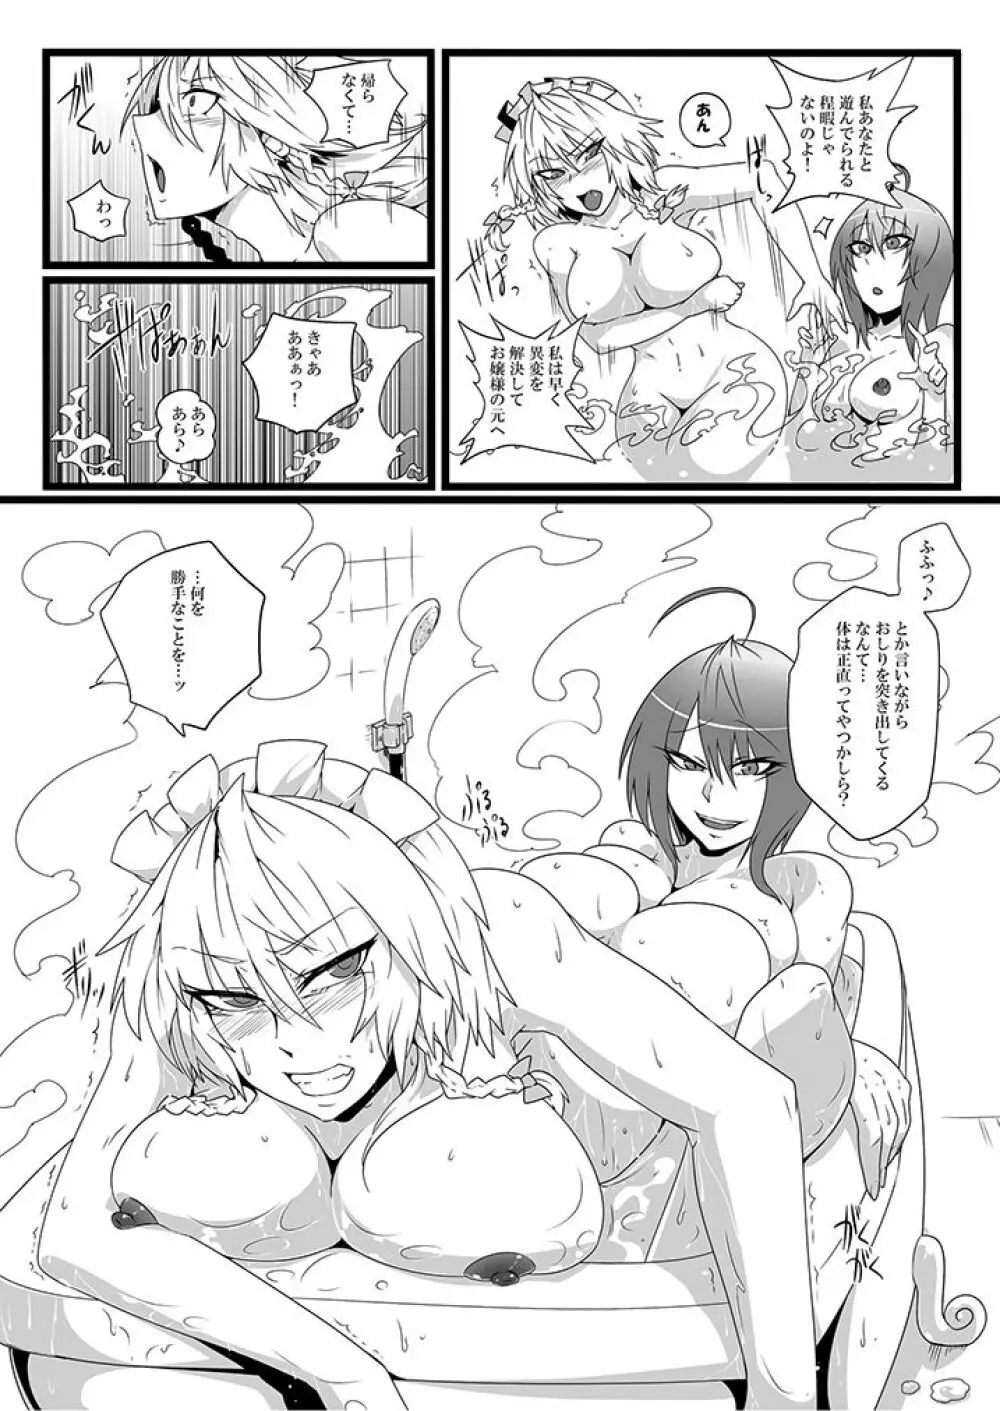 SAKUYA MAID in HEAVEN/ALL IN 1 - page151